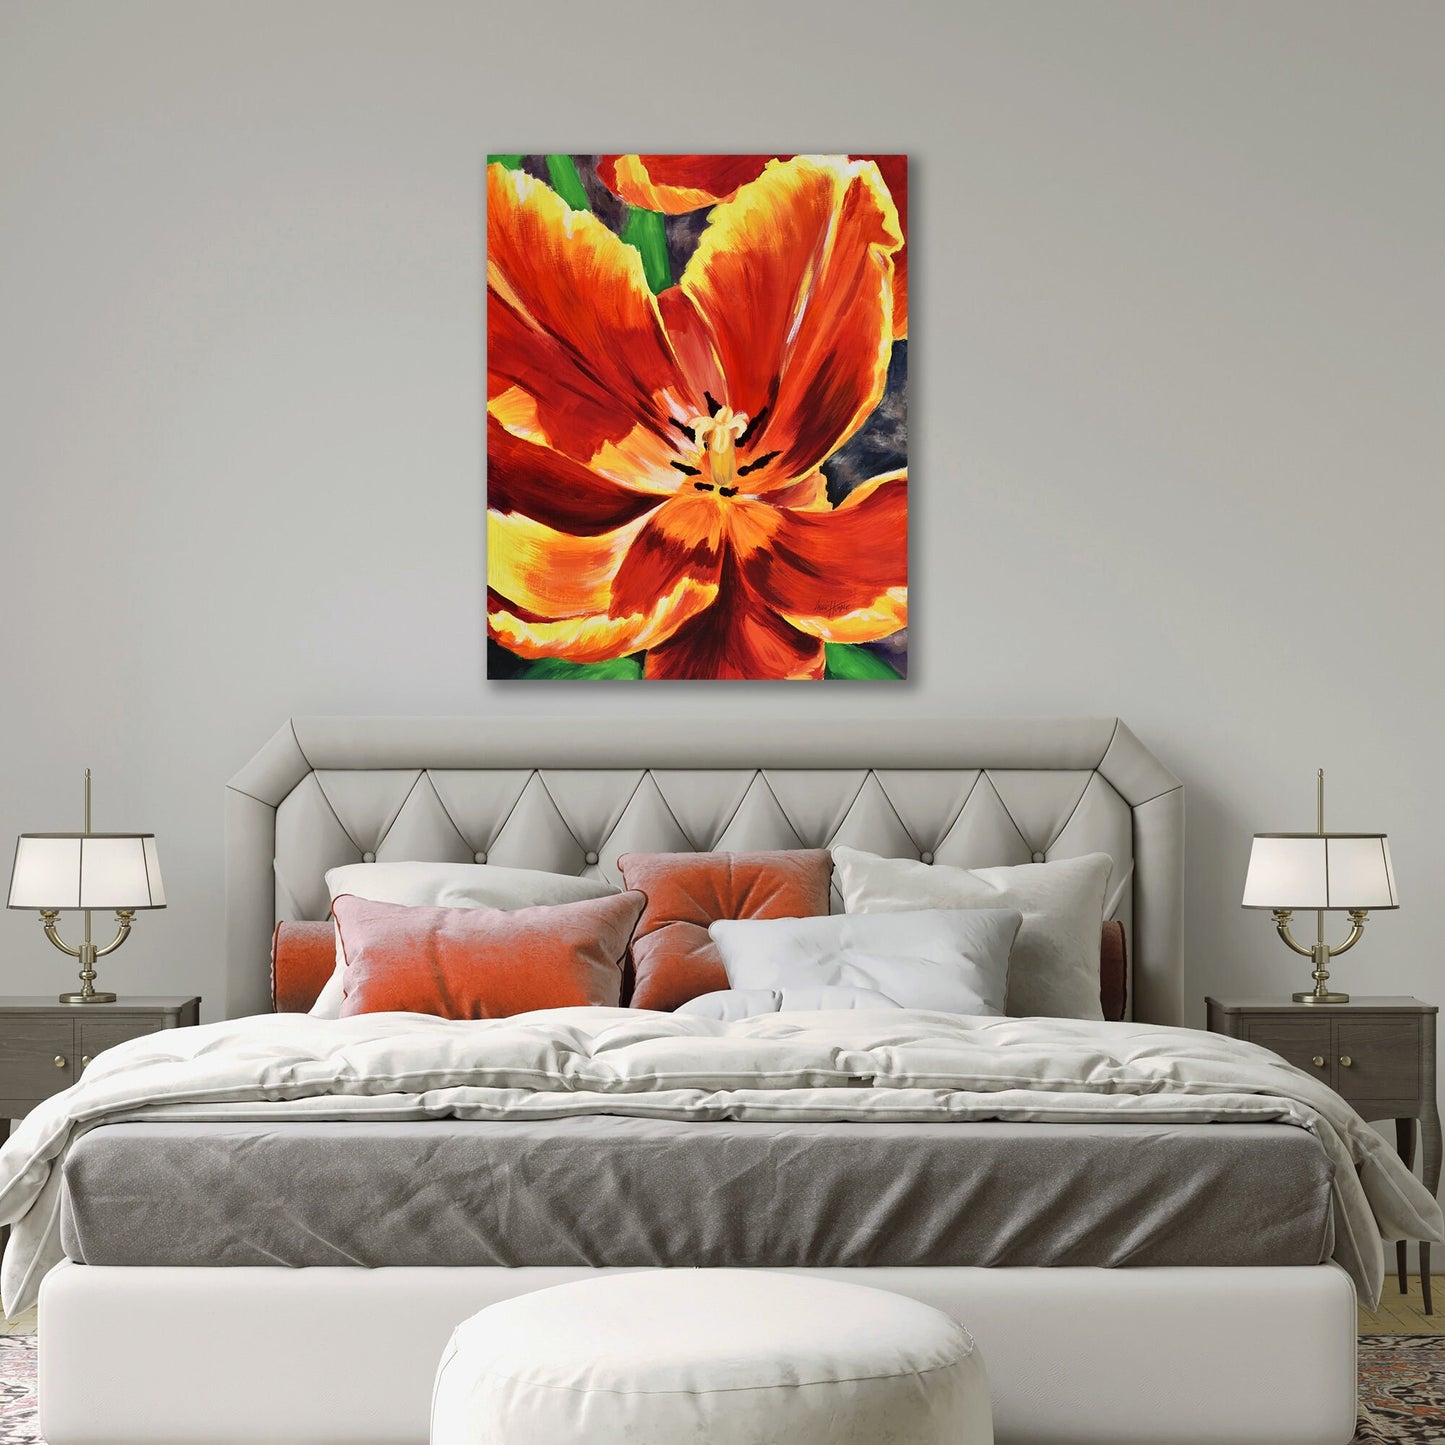 Flower Painting, Tulip Painting, Large Wall Art, Oil Painting, Canvas Print, Modern Wall Art